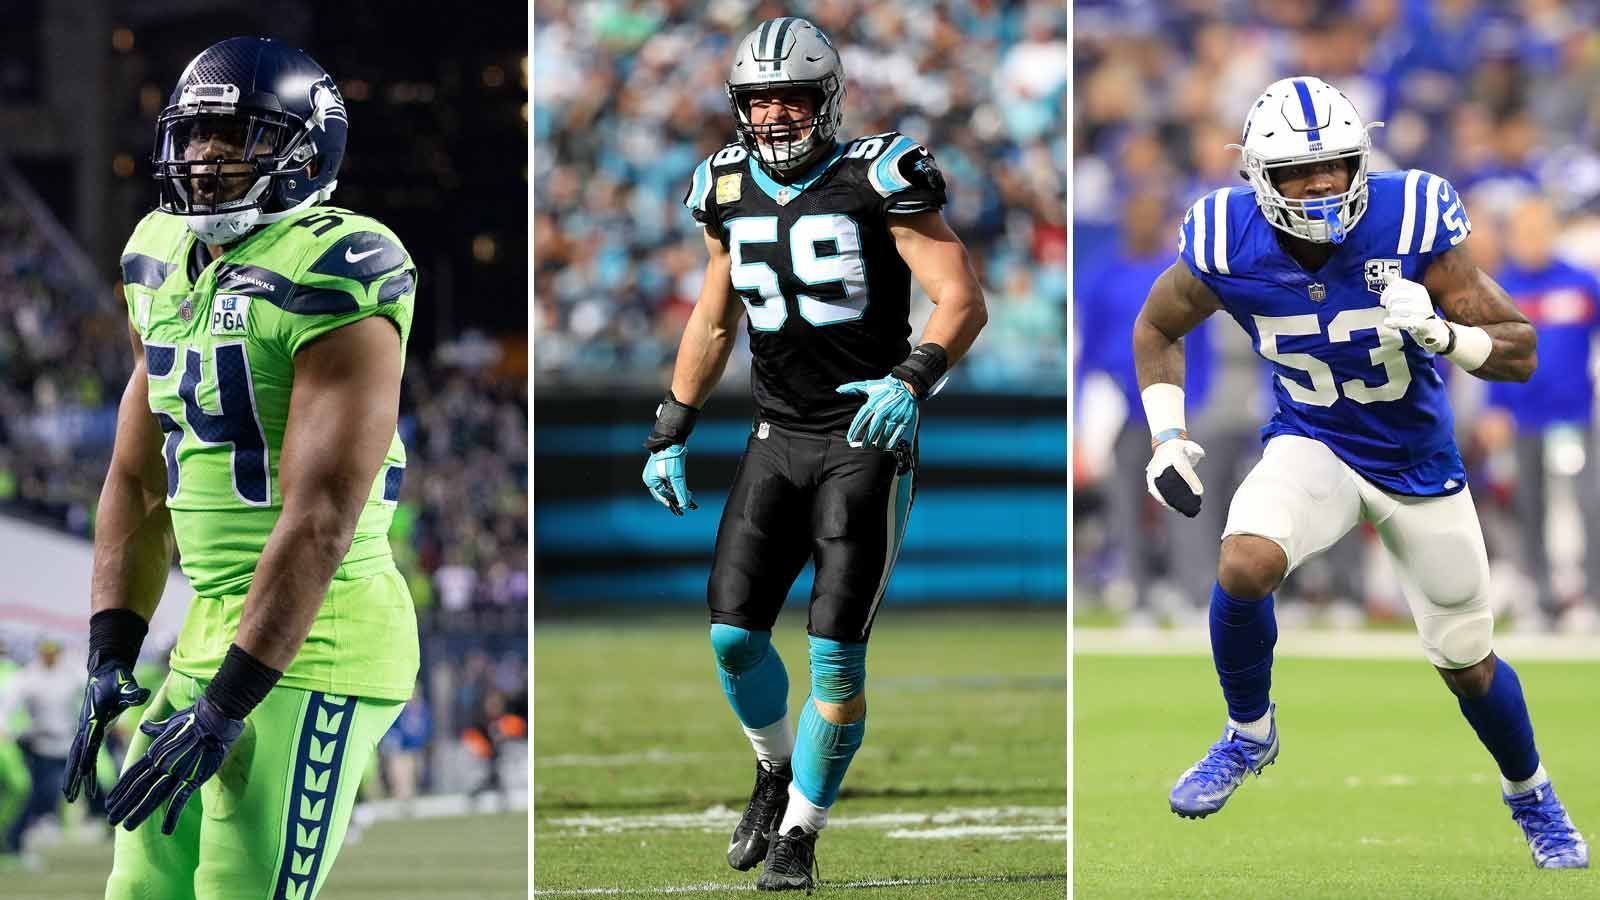 
                <strong>Linebackers</strong><br>
                First Team: Bobby Wagner (Seattle Seahawks), Luke Kuechly (Carolina Panthers), Darius Leonard (Indianapolis Colts)Second Team: Von Miller (Denver Broncos), C.J. Mosley (Baltimore Ravens), Leighton Vander Esch (Dallas Cowboys)
              